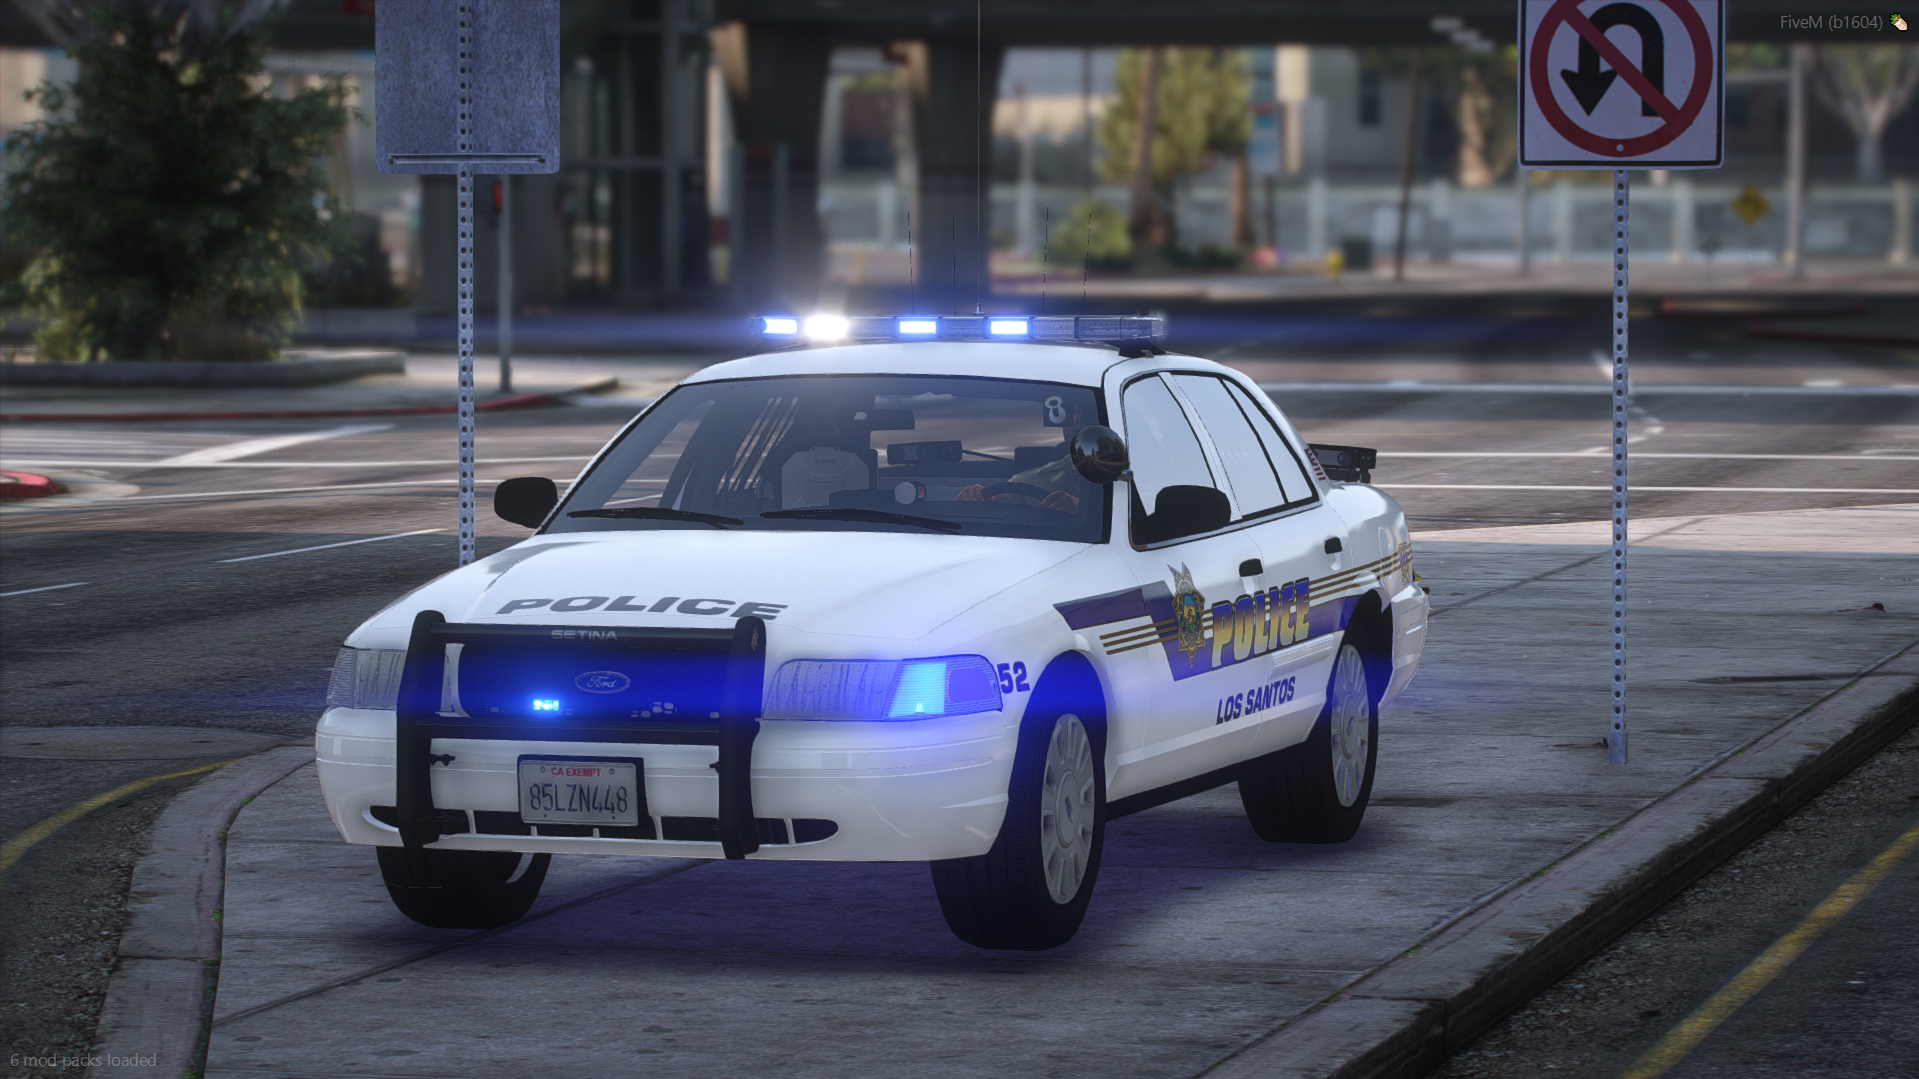 A police car with a Whelen Patriot lightbar, created by Othrin with retro styling for FiveM